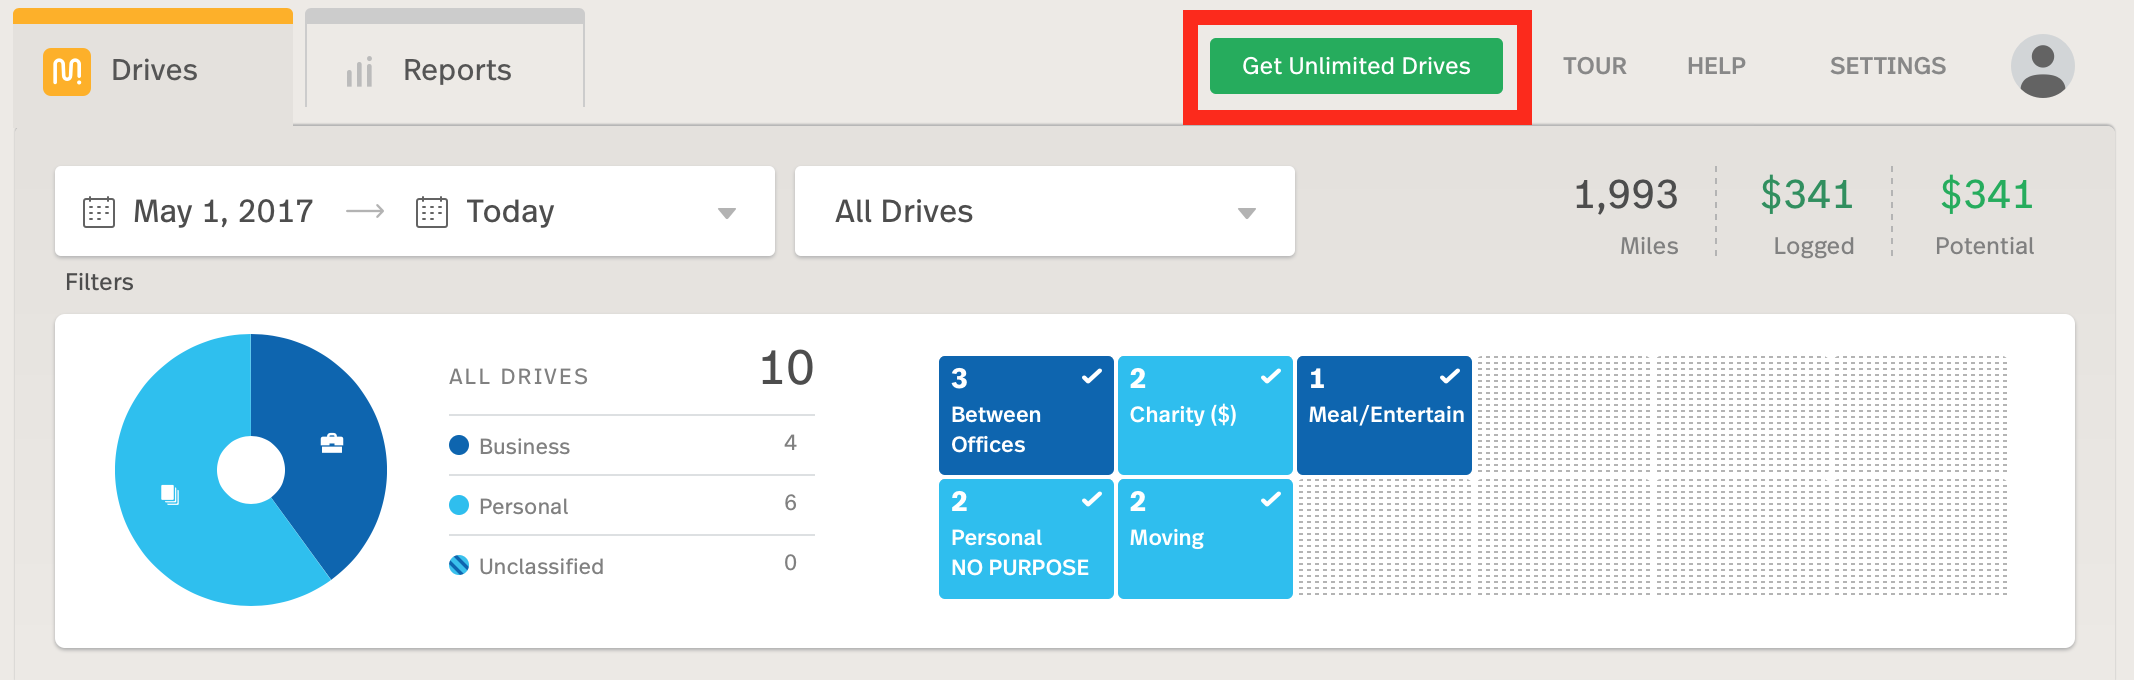 This image shows how to get unlimited drives from the web dashboard